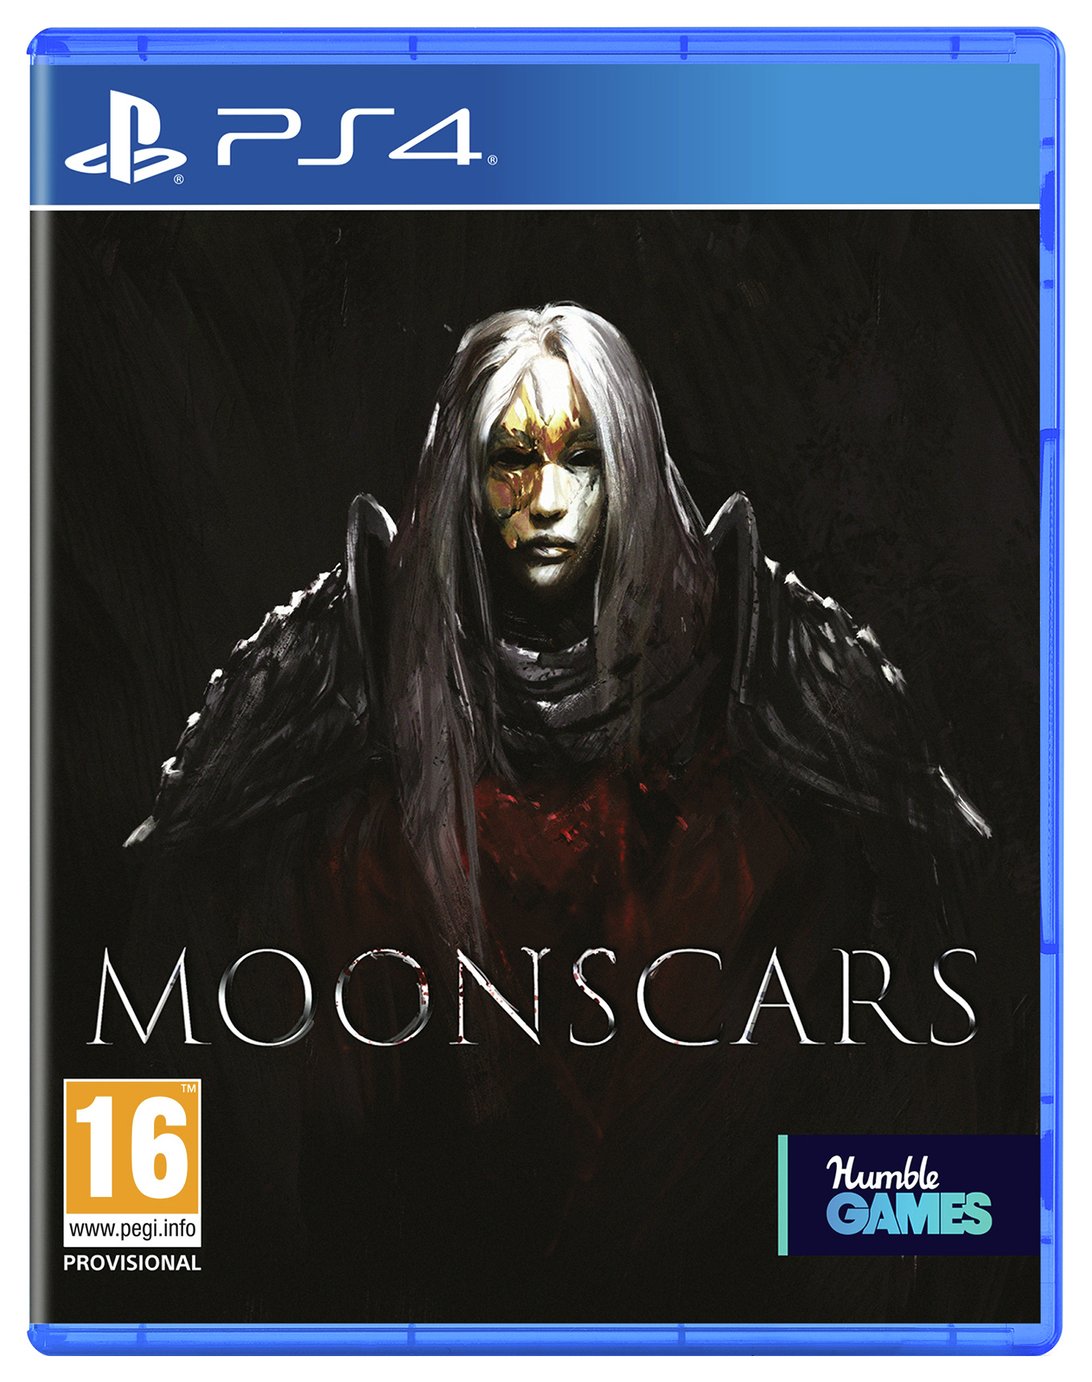 Moonscars PS4 Game